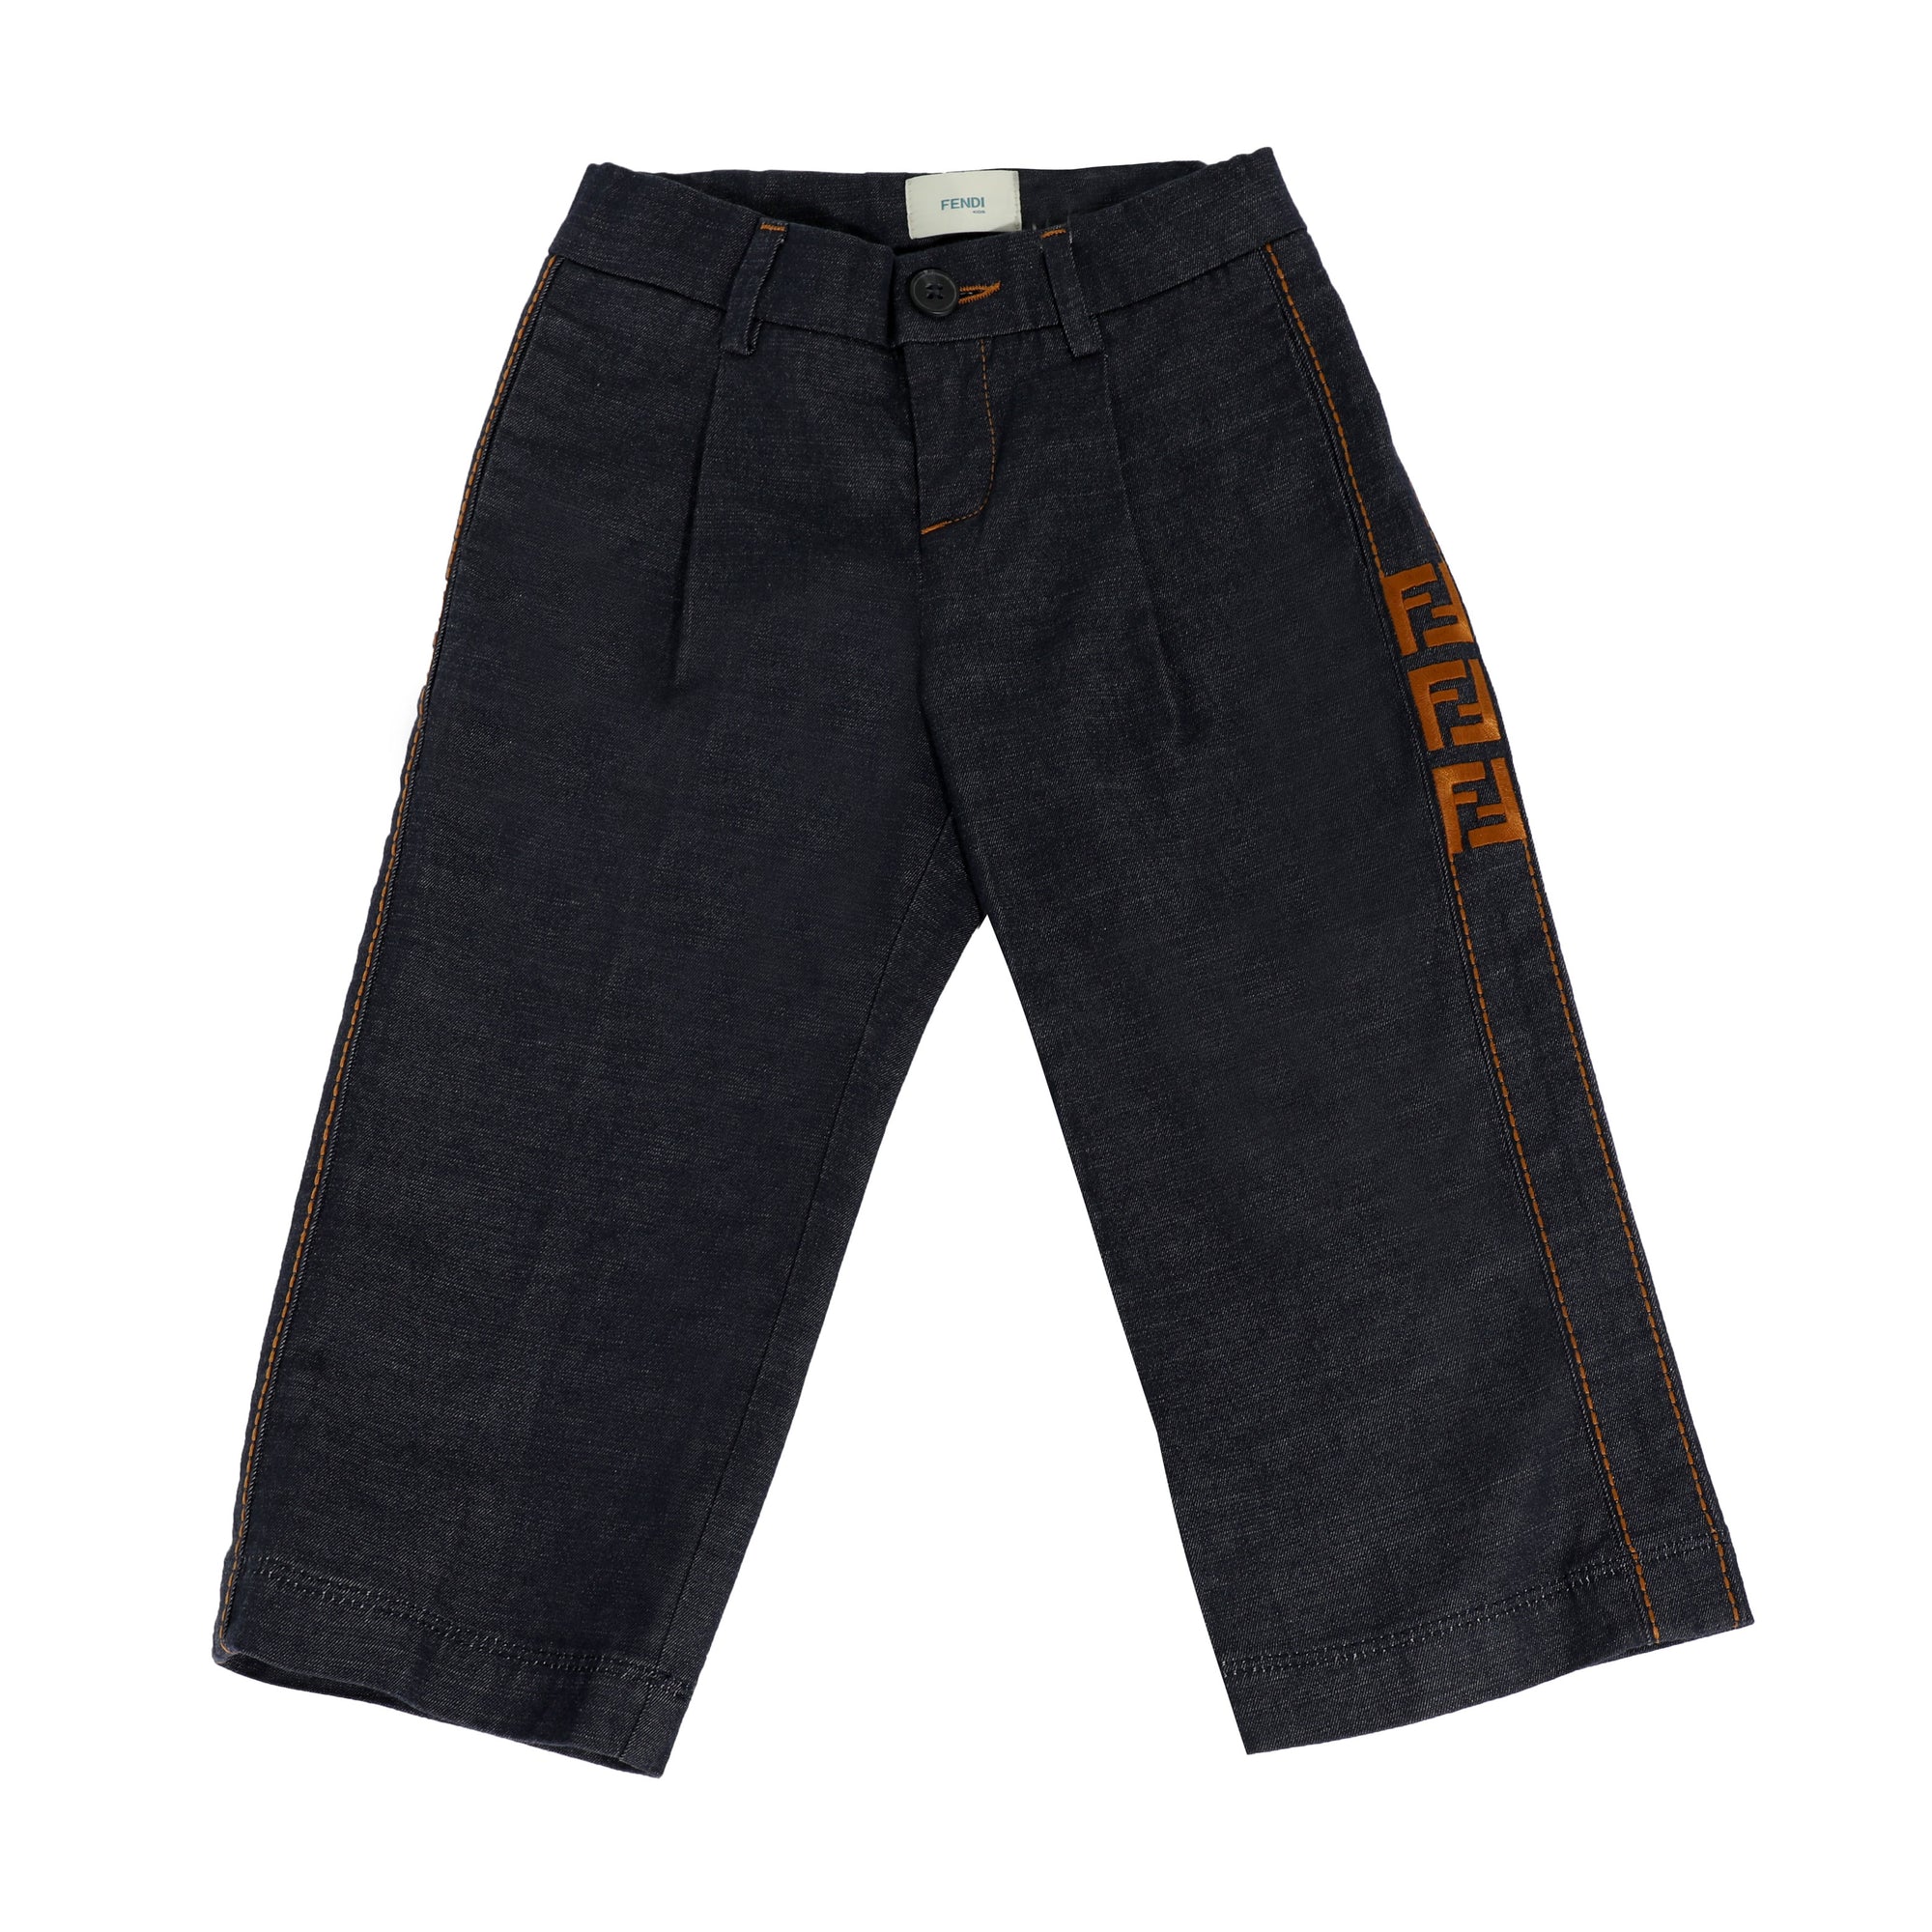 BOY DENIM PANTS W/ ORANGE STITCHING AND FF EMBROIDERY ON THE SIDE